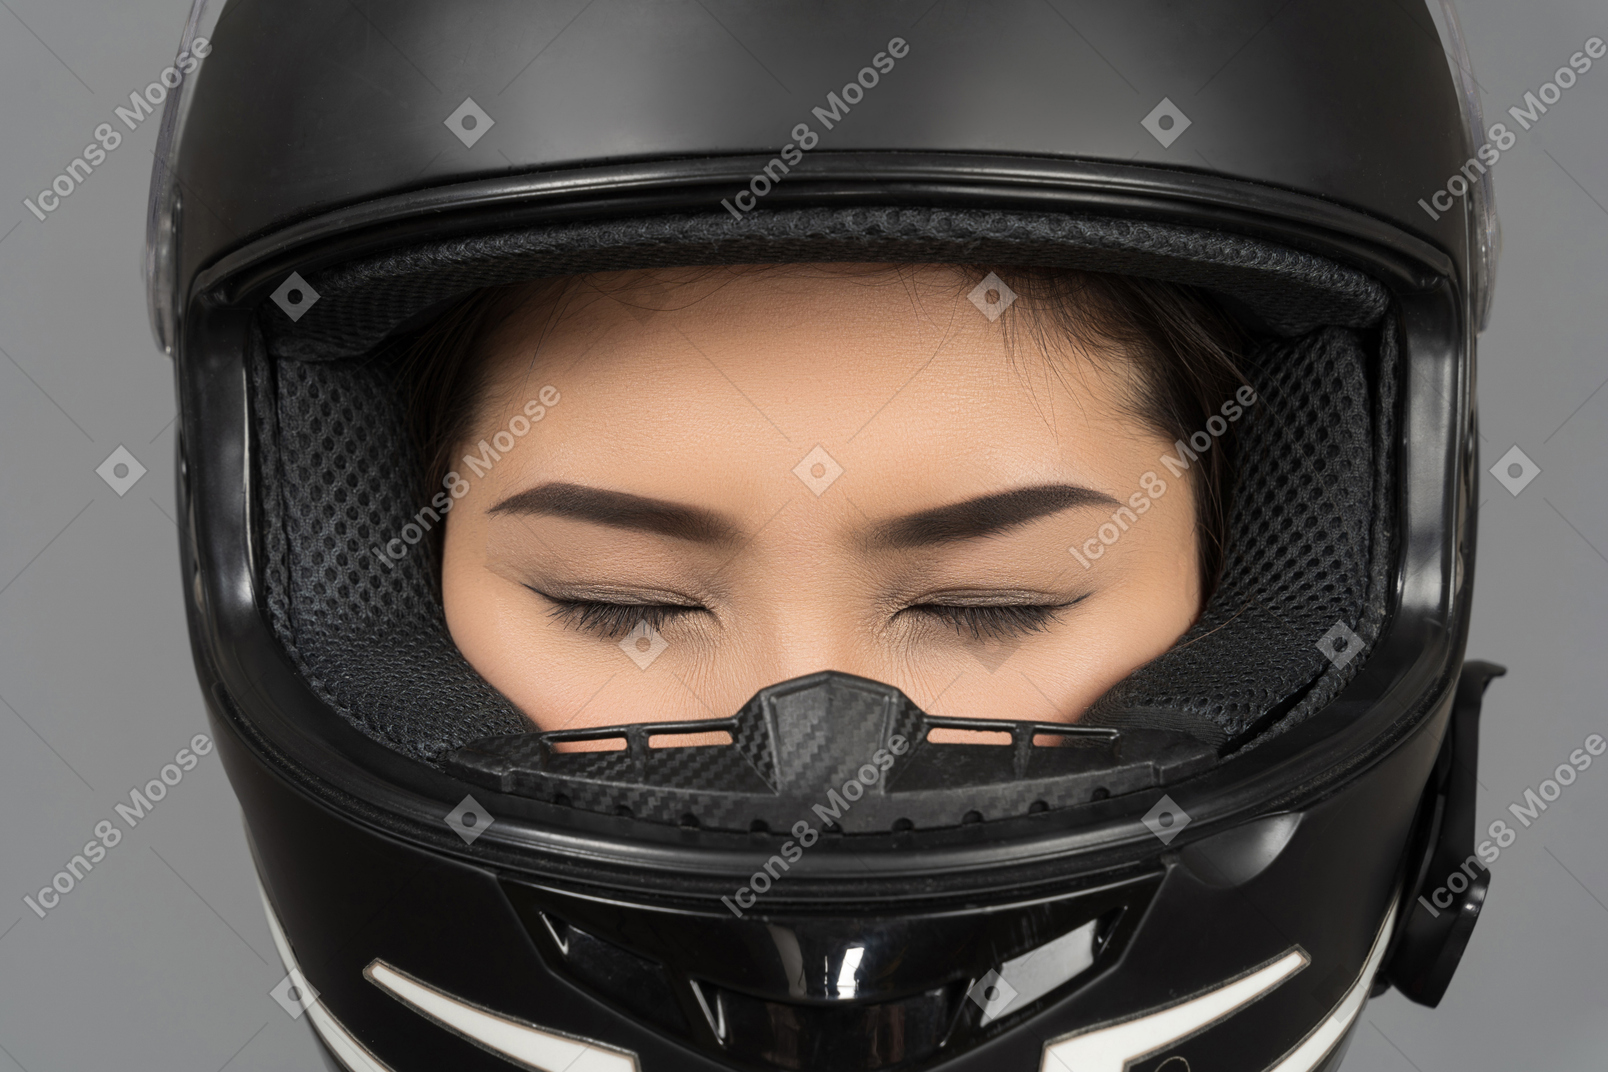 A woman with closed eyes wearing a black helmet